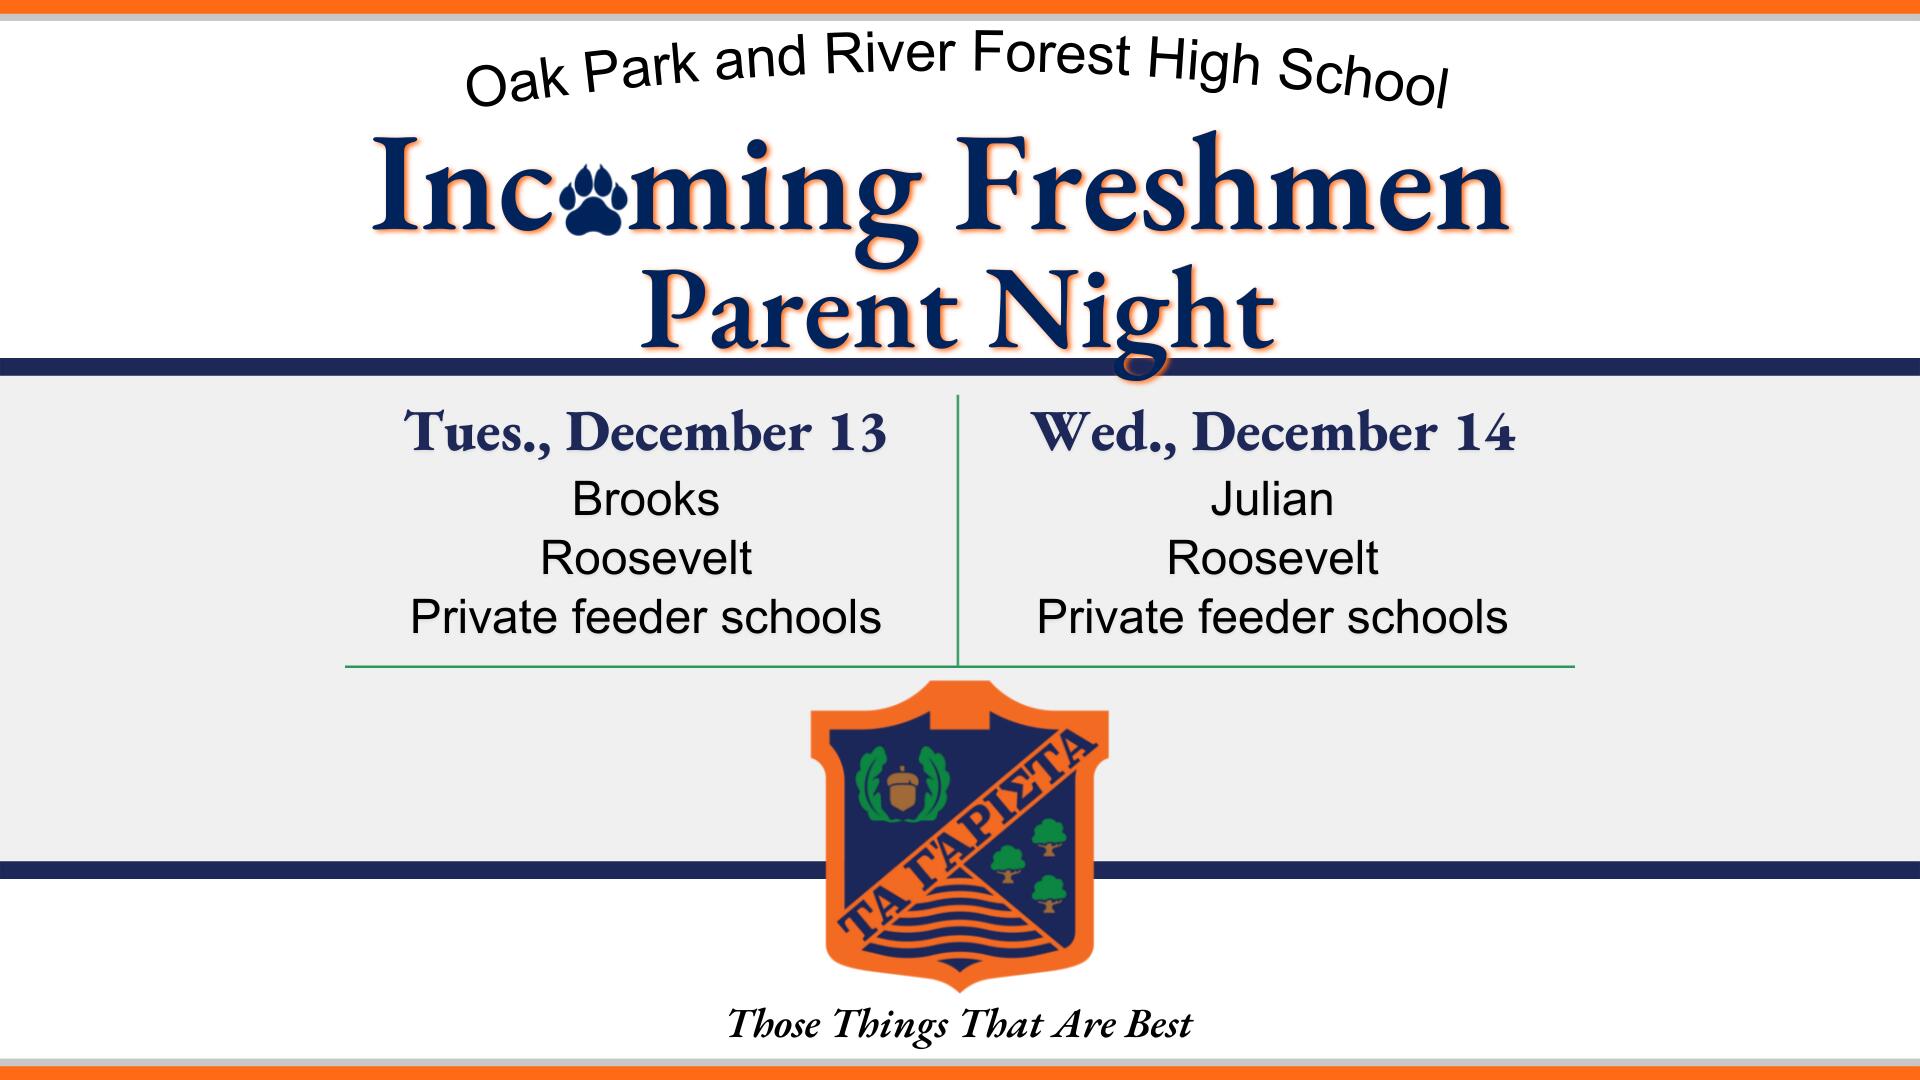 Upcoming for future Huskie families